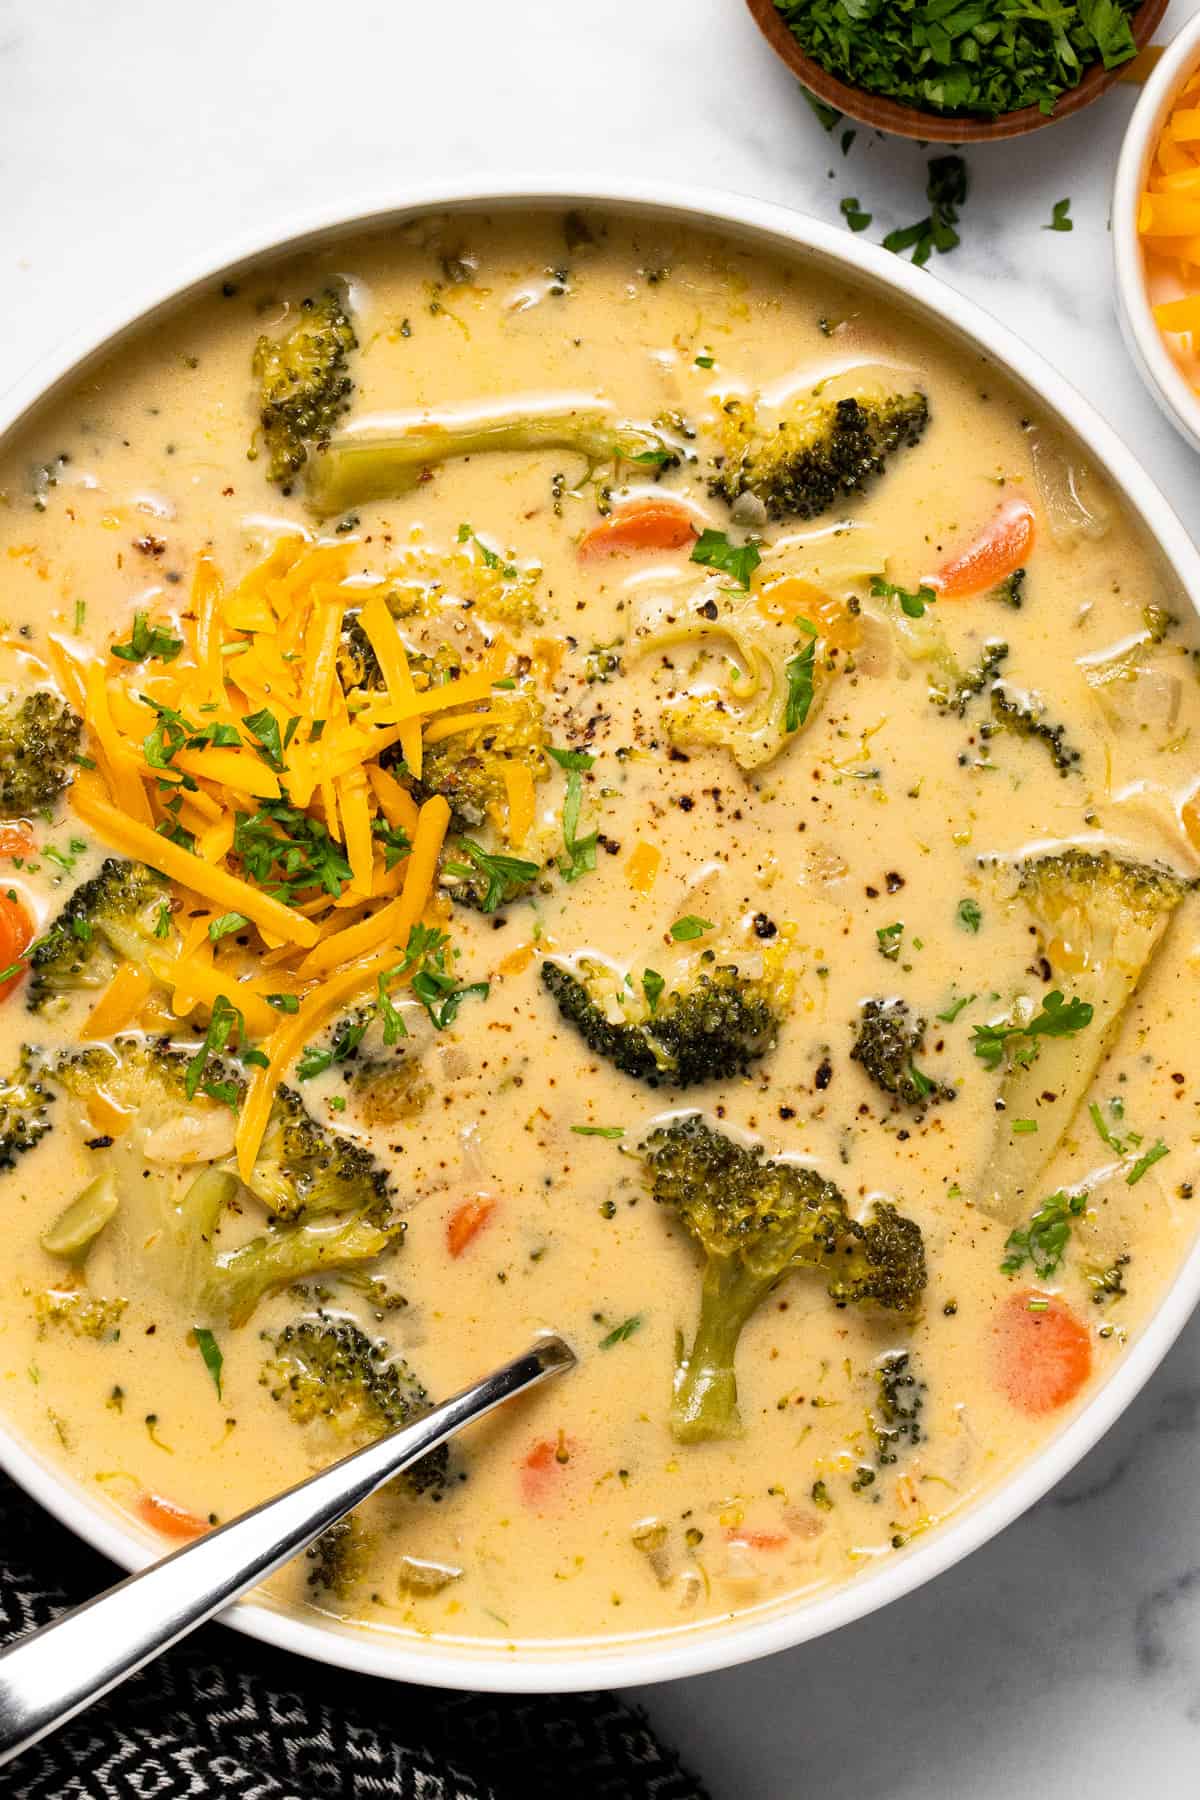 Easy Broccoli Cheese Soup - Vegetarian! - Midwest Foodie